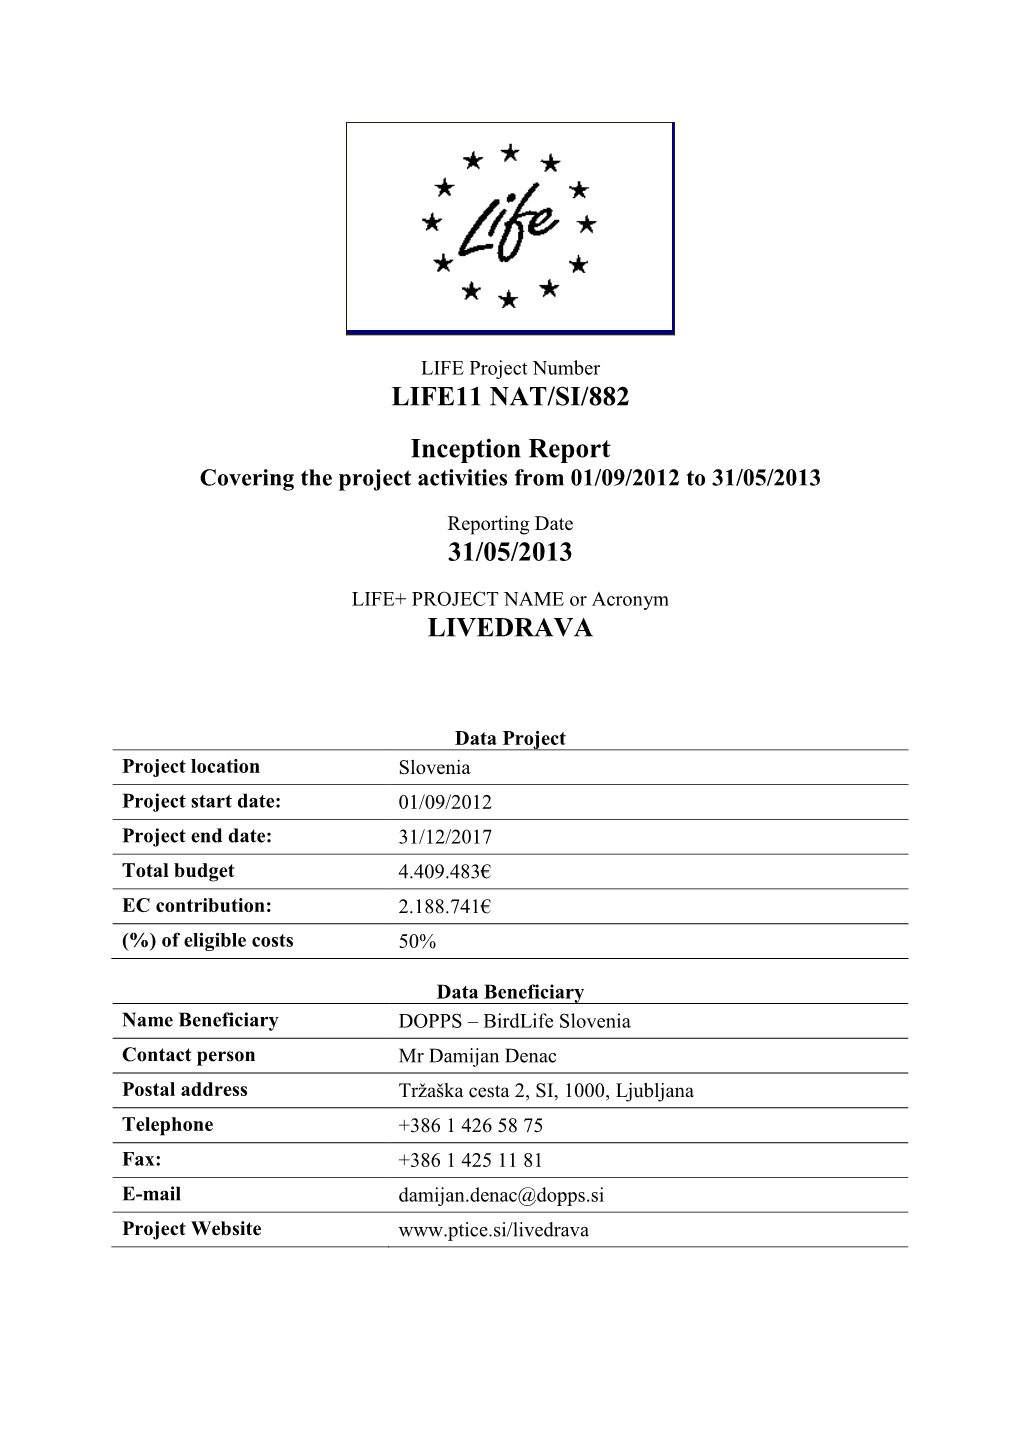 LIFE11 NAT/SI/882 Inception Report Covering the Project Activities from 01/09/2012 to 31/05/2013